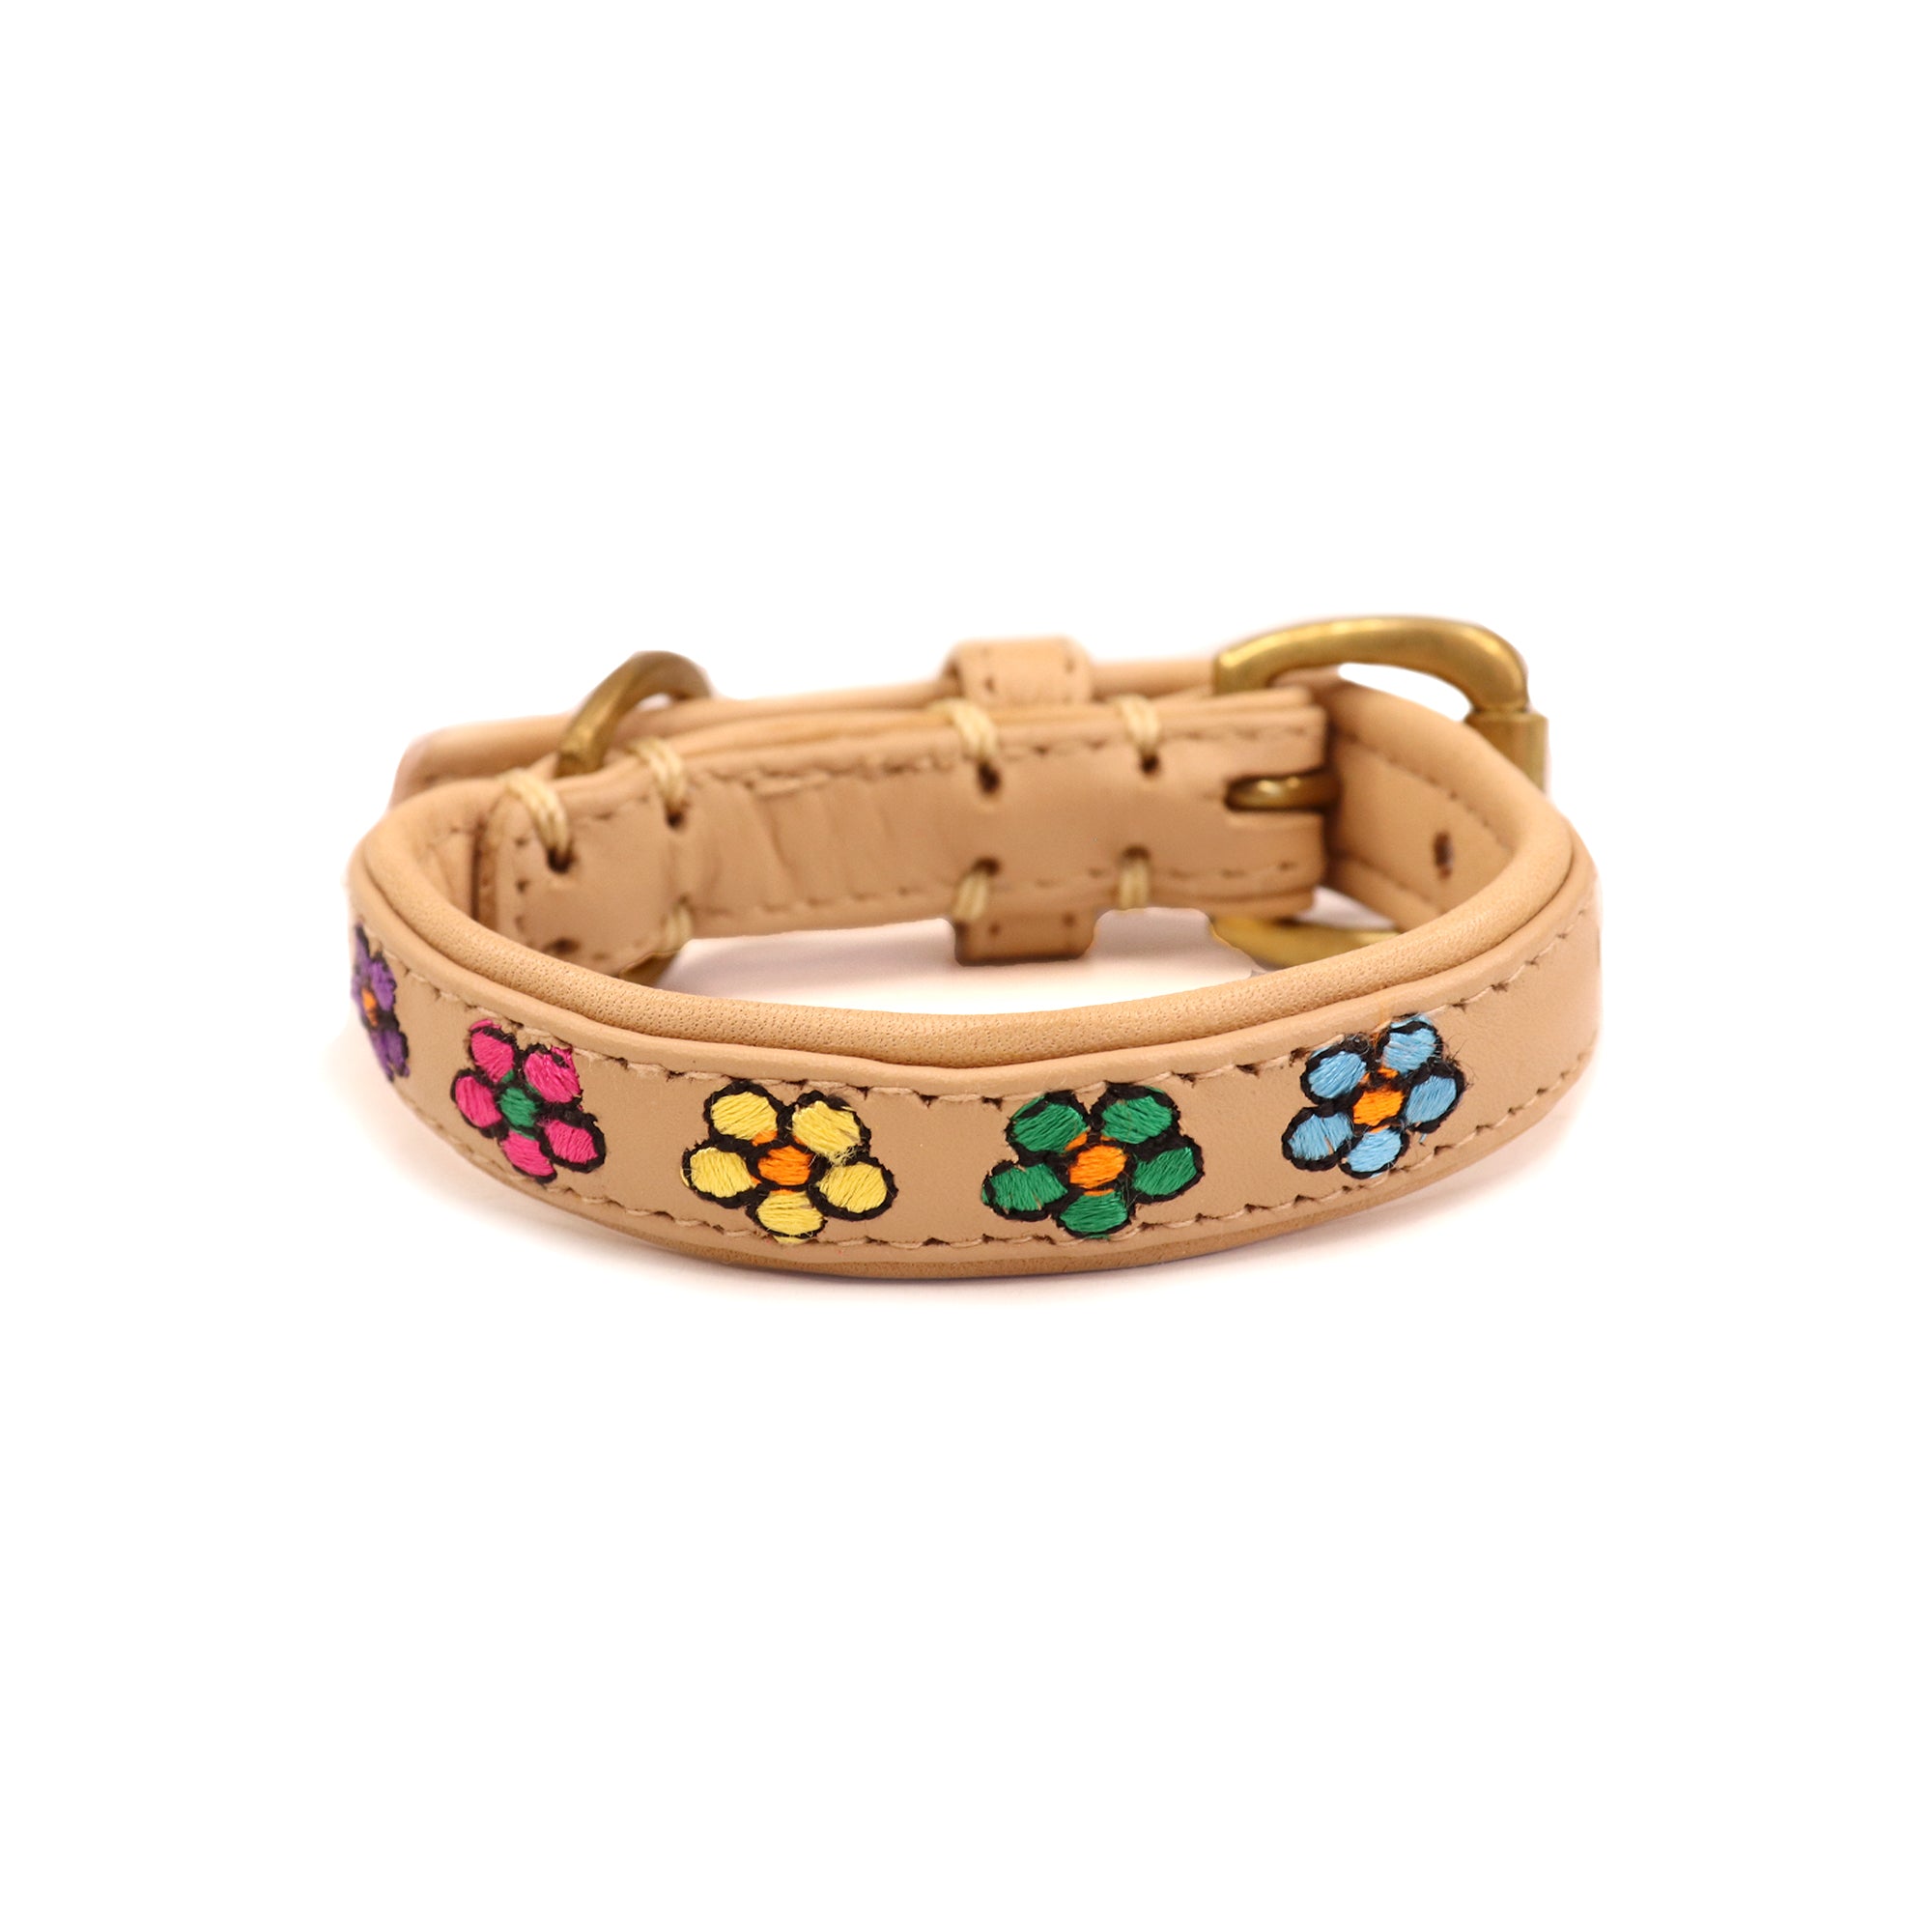 A Botanic Fleur collar from Georgie Paws, adorned with stitched daisies in blue, green, yellow and red. It features a gold buckle and loop, with visible stitching along the edges, set against a white background.